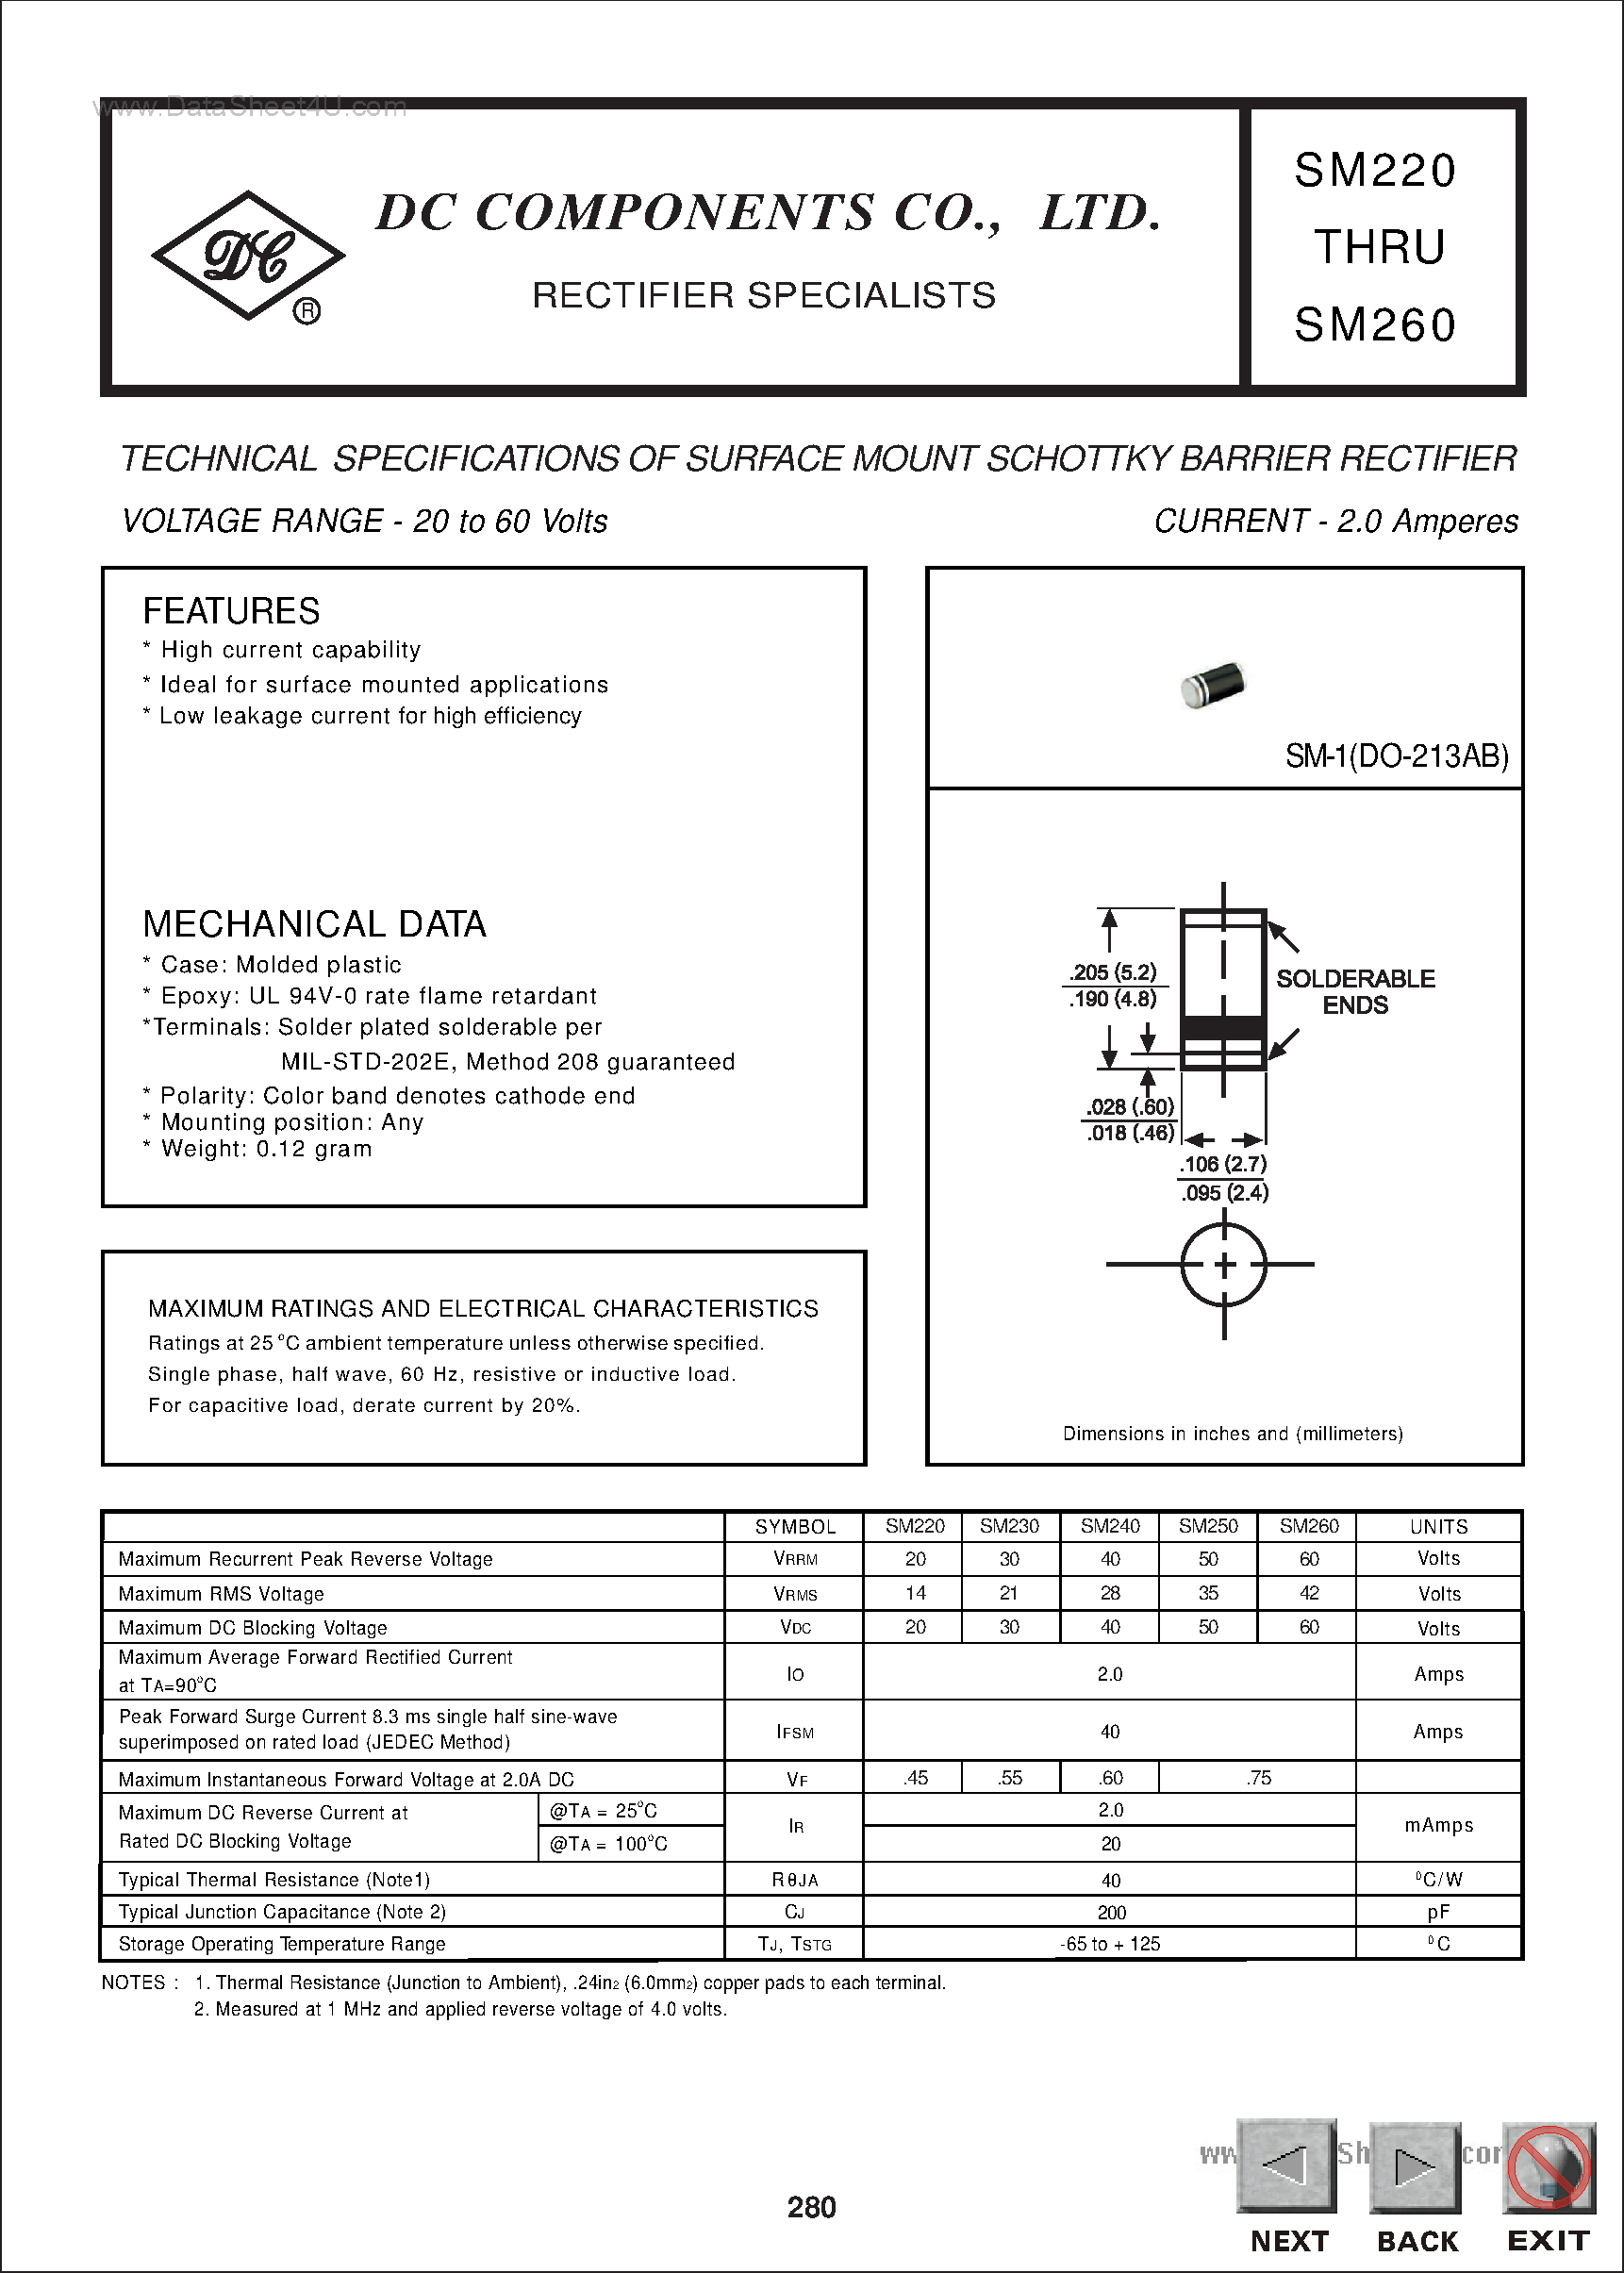 Datasheet SM260 - TECHNICAL SPECIFICATIONS OF SURFACE MOUNT SCHOTTKY BARRIER RECTIFIER page 1